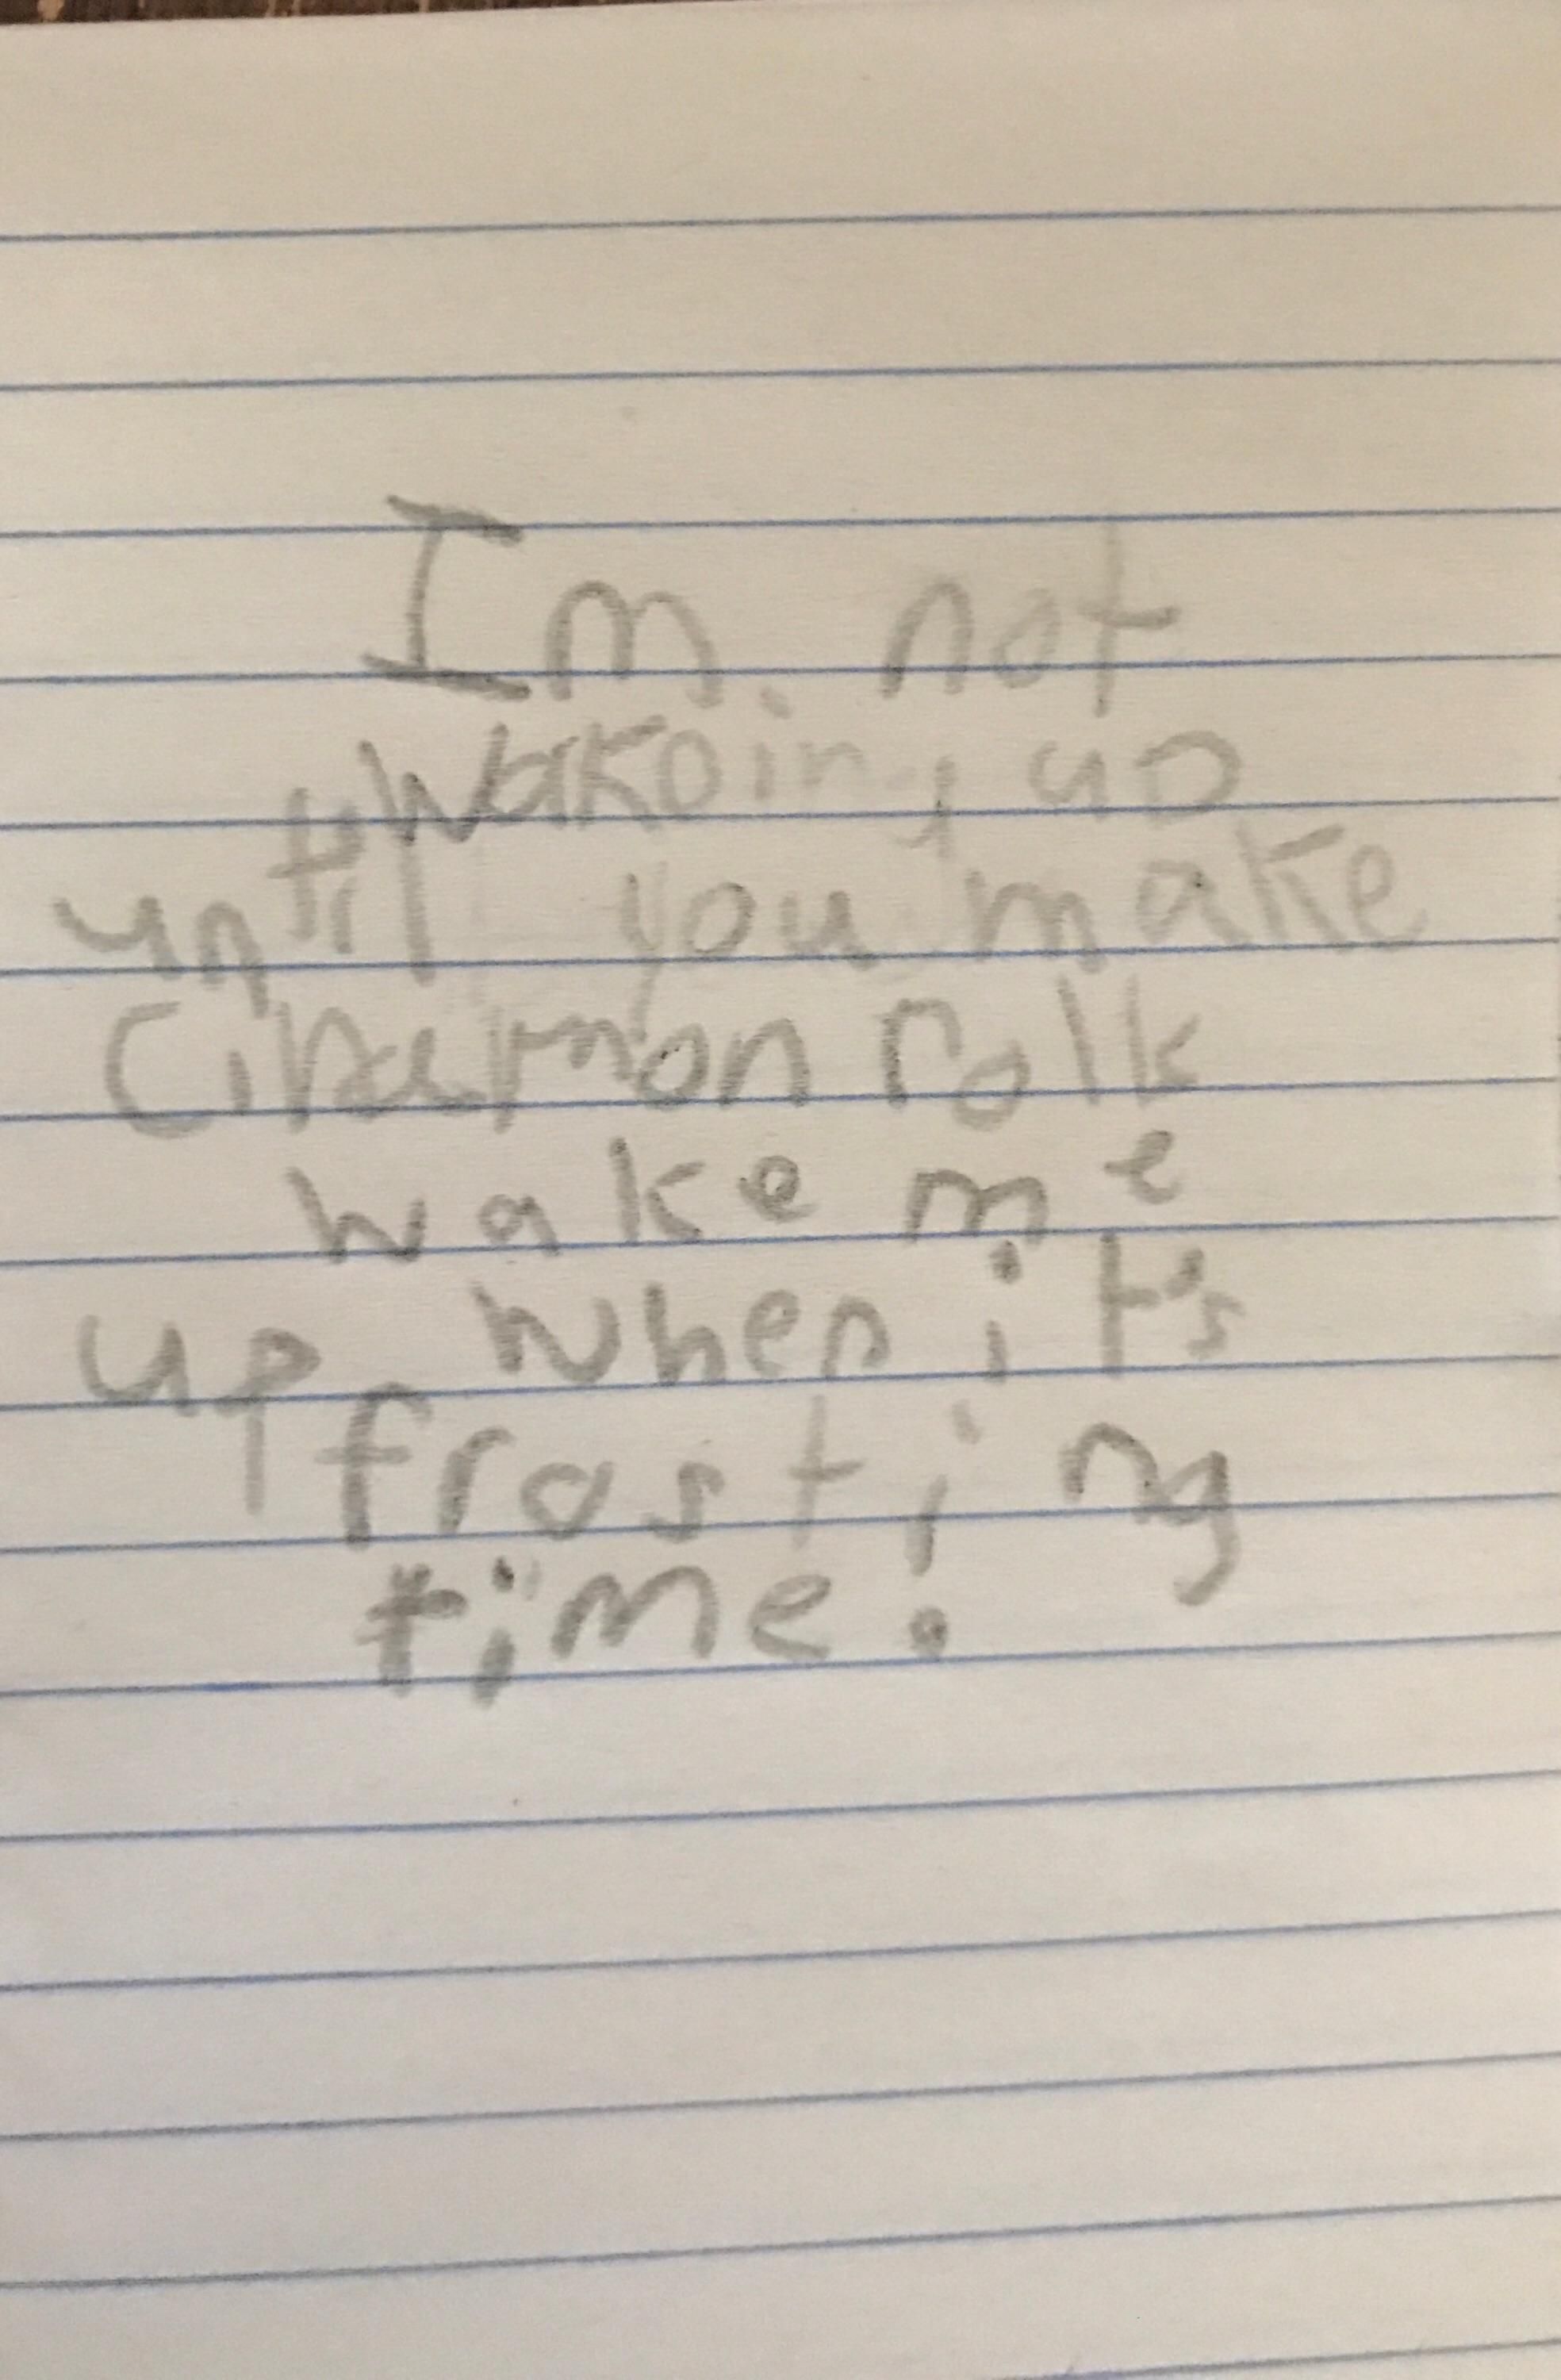 My 7 y/o daughter sent her younger brother to deliver a stern message.